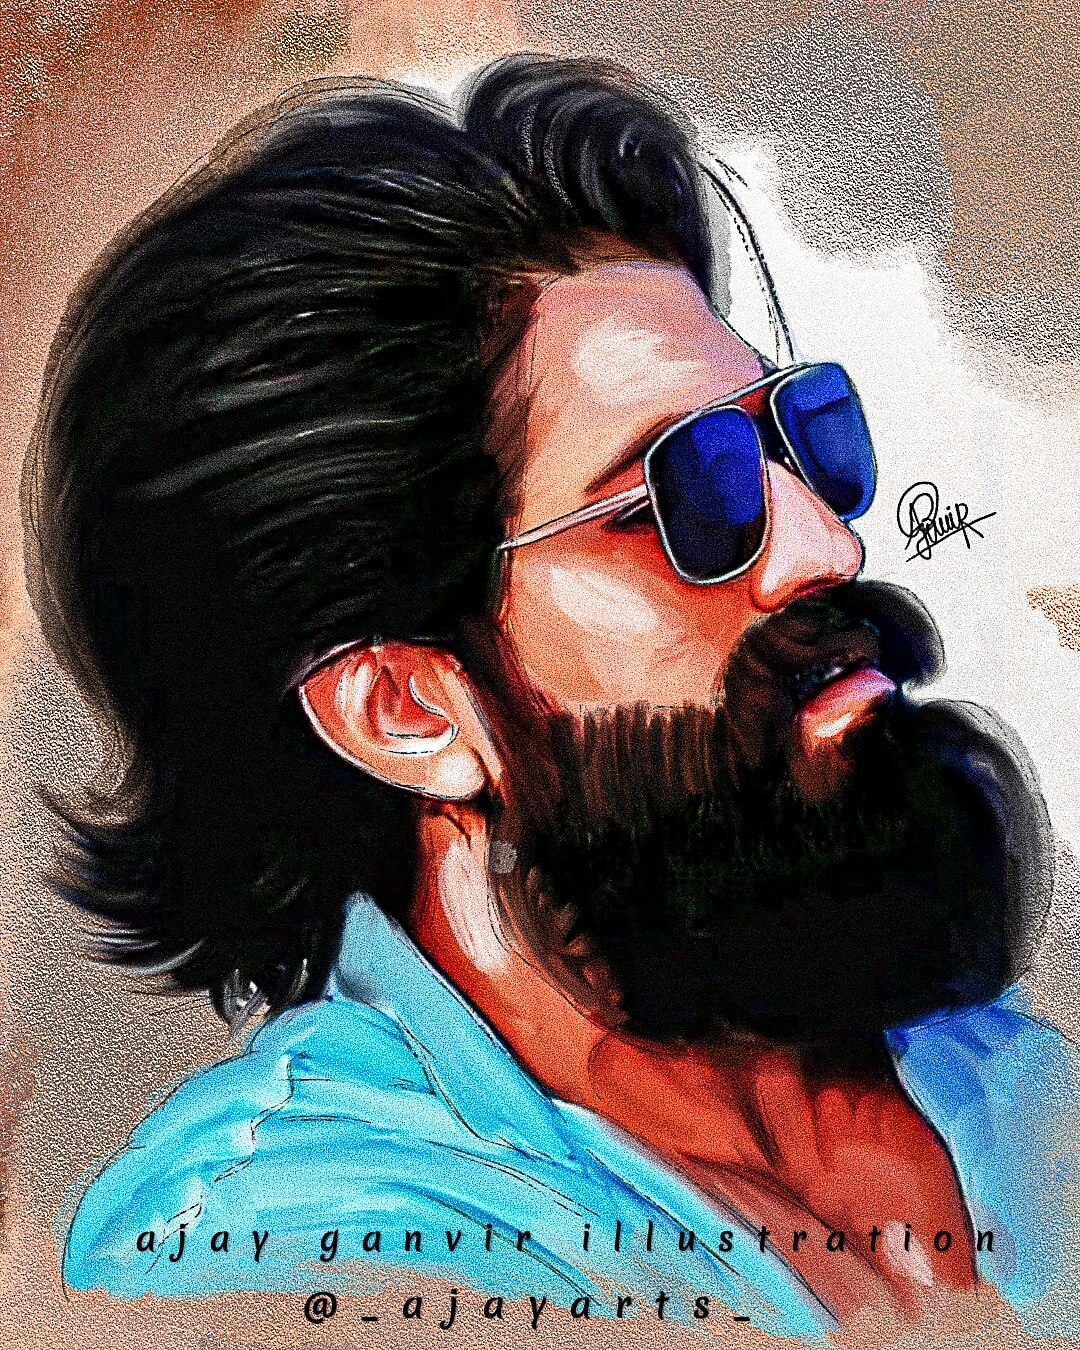 Rocking star YASH art by hithesh Artist VRhithesh art by VR HITHESH  artbyhithesh kg  Pencil portrait drawing Abstract pencil drawings  Human figure sketches